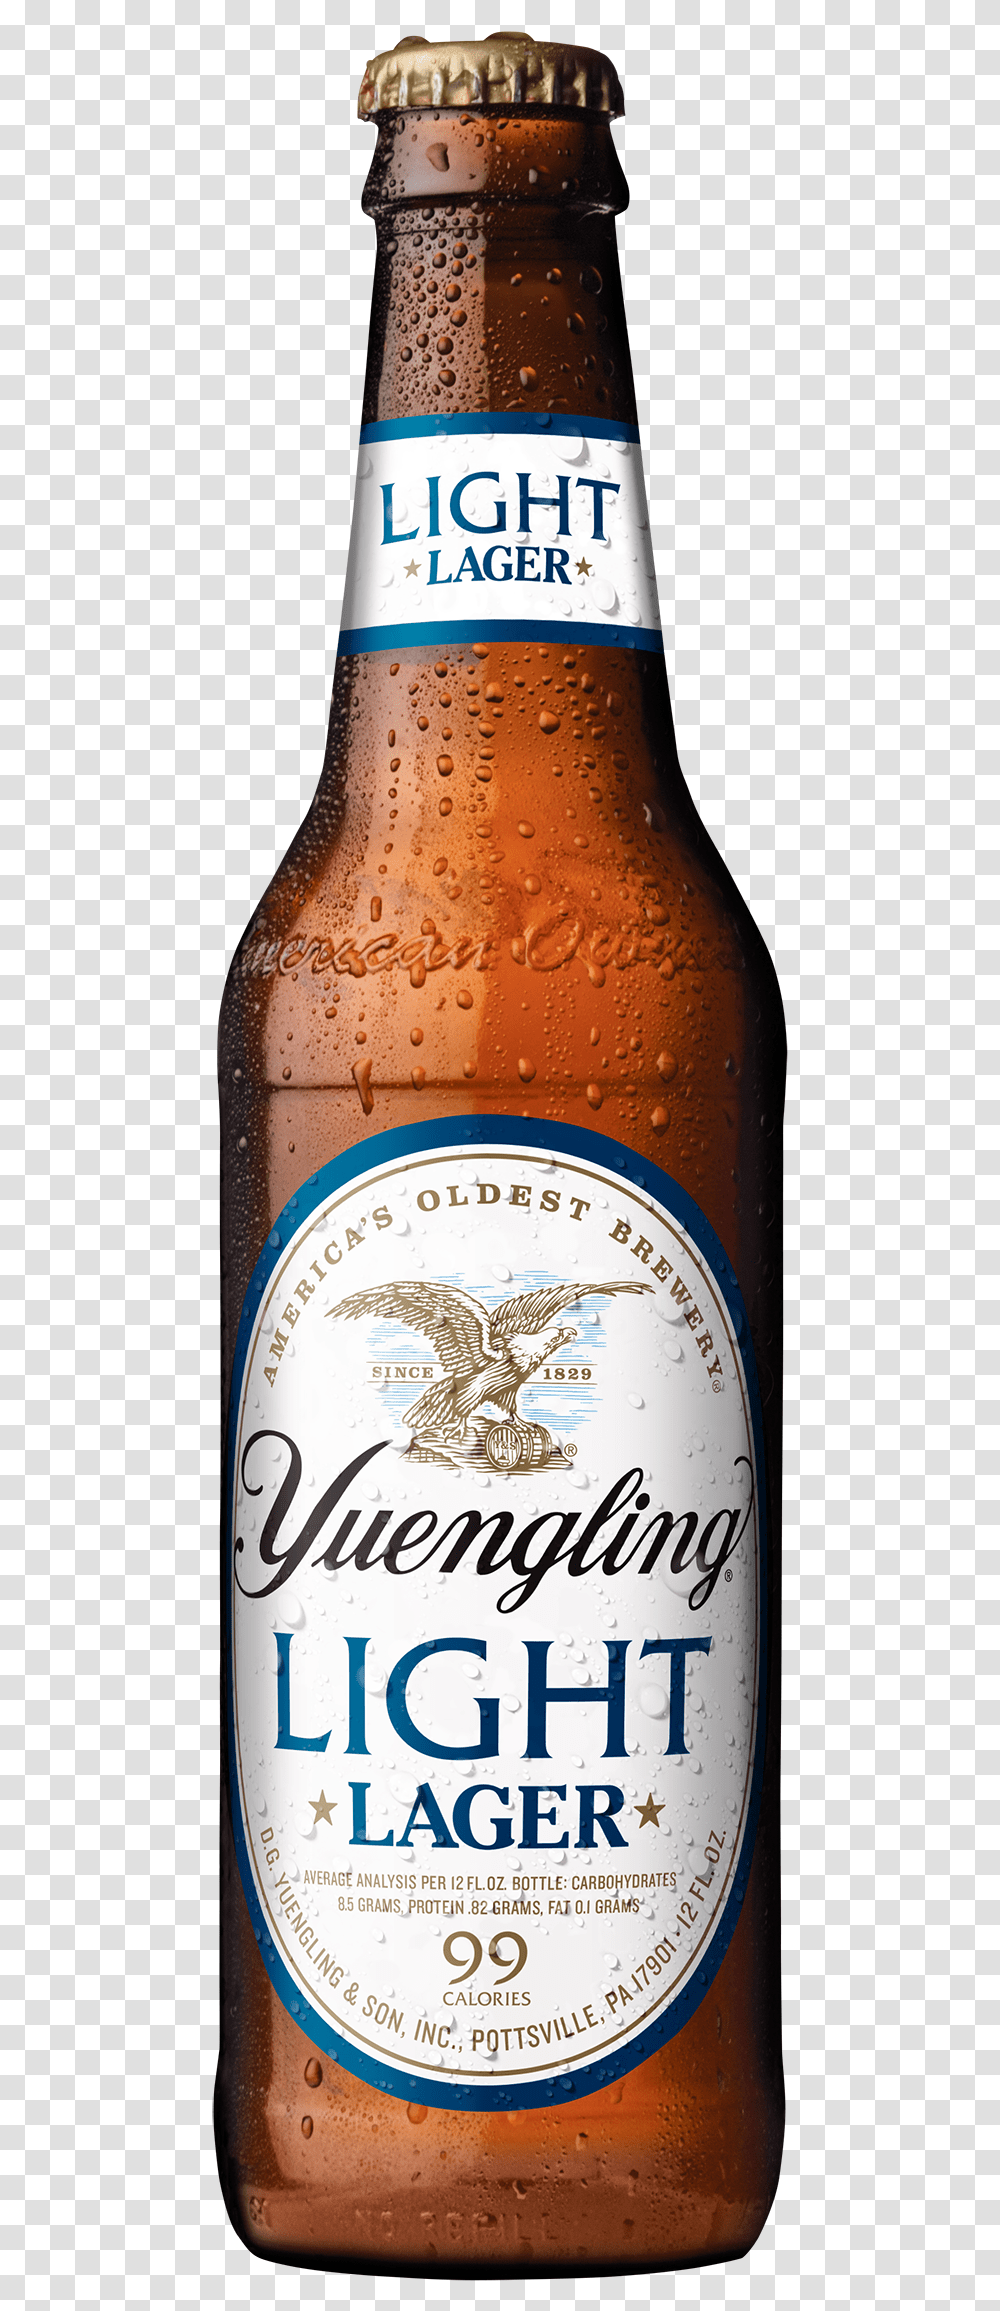 Yuengling Light Lager 99 Calories, Beer, Alcohol, Beverage, Drink Transparent Png